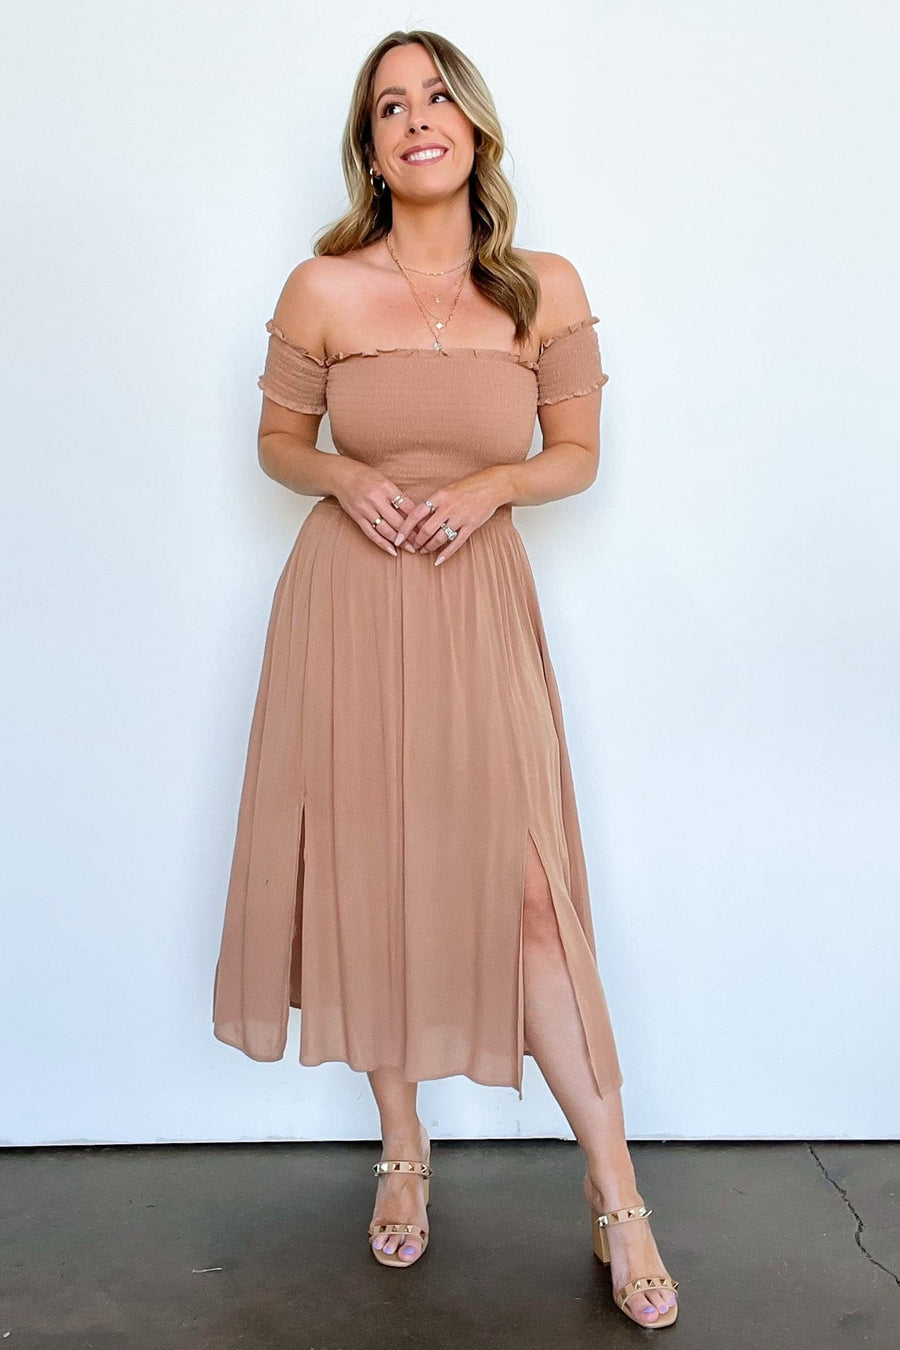 Clay / S Natashe Off Shoulder Smocked Dress - FINAL SALE - Madison and Mallory